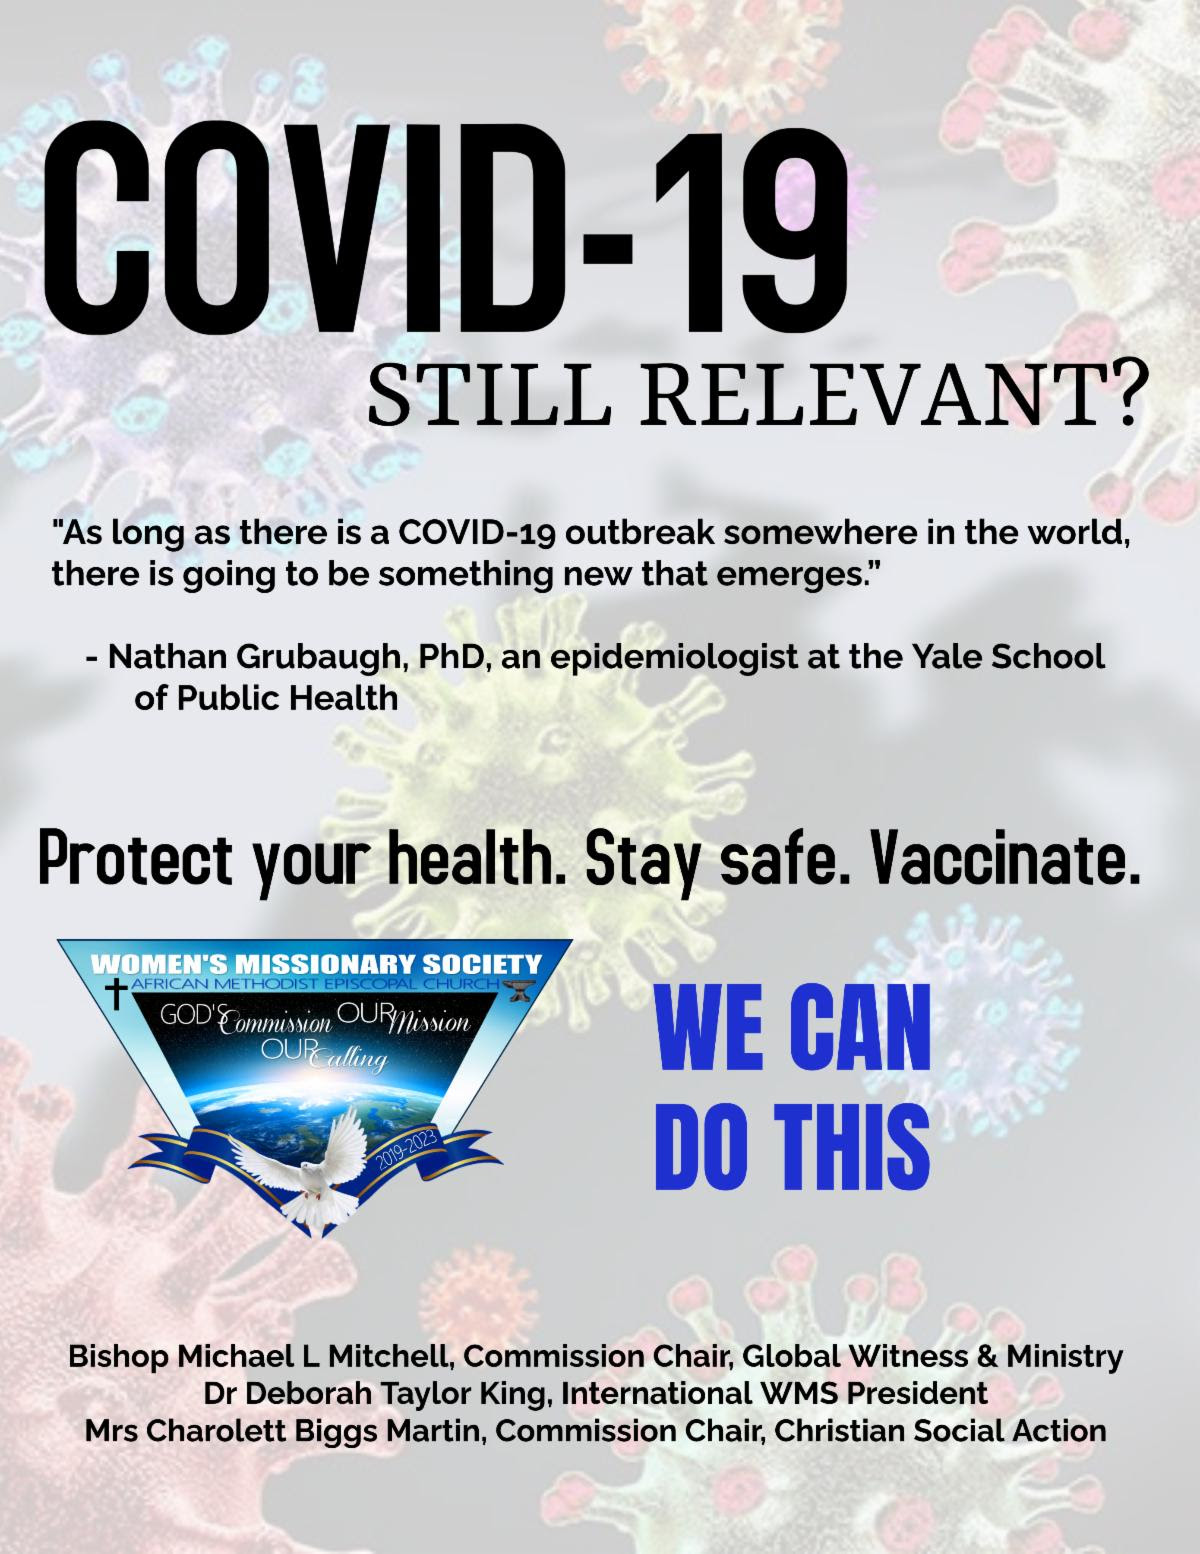 COVID-19 and We Care